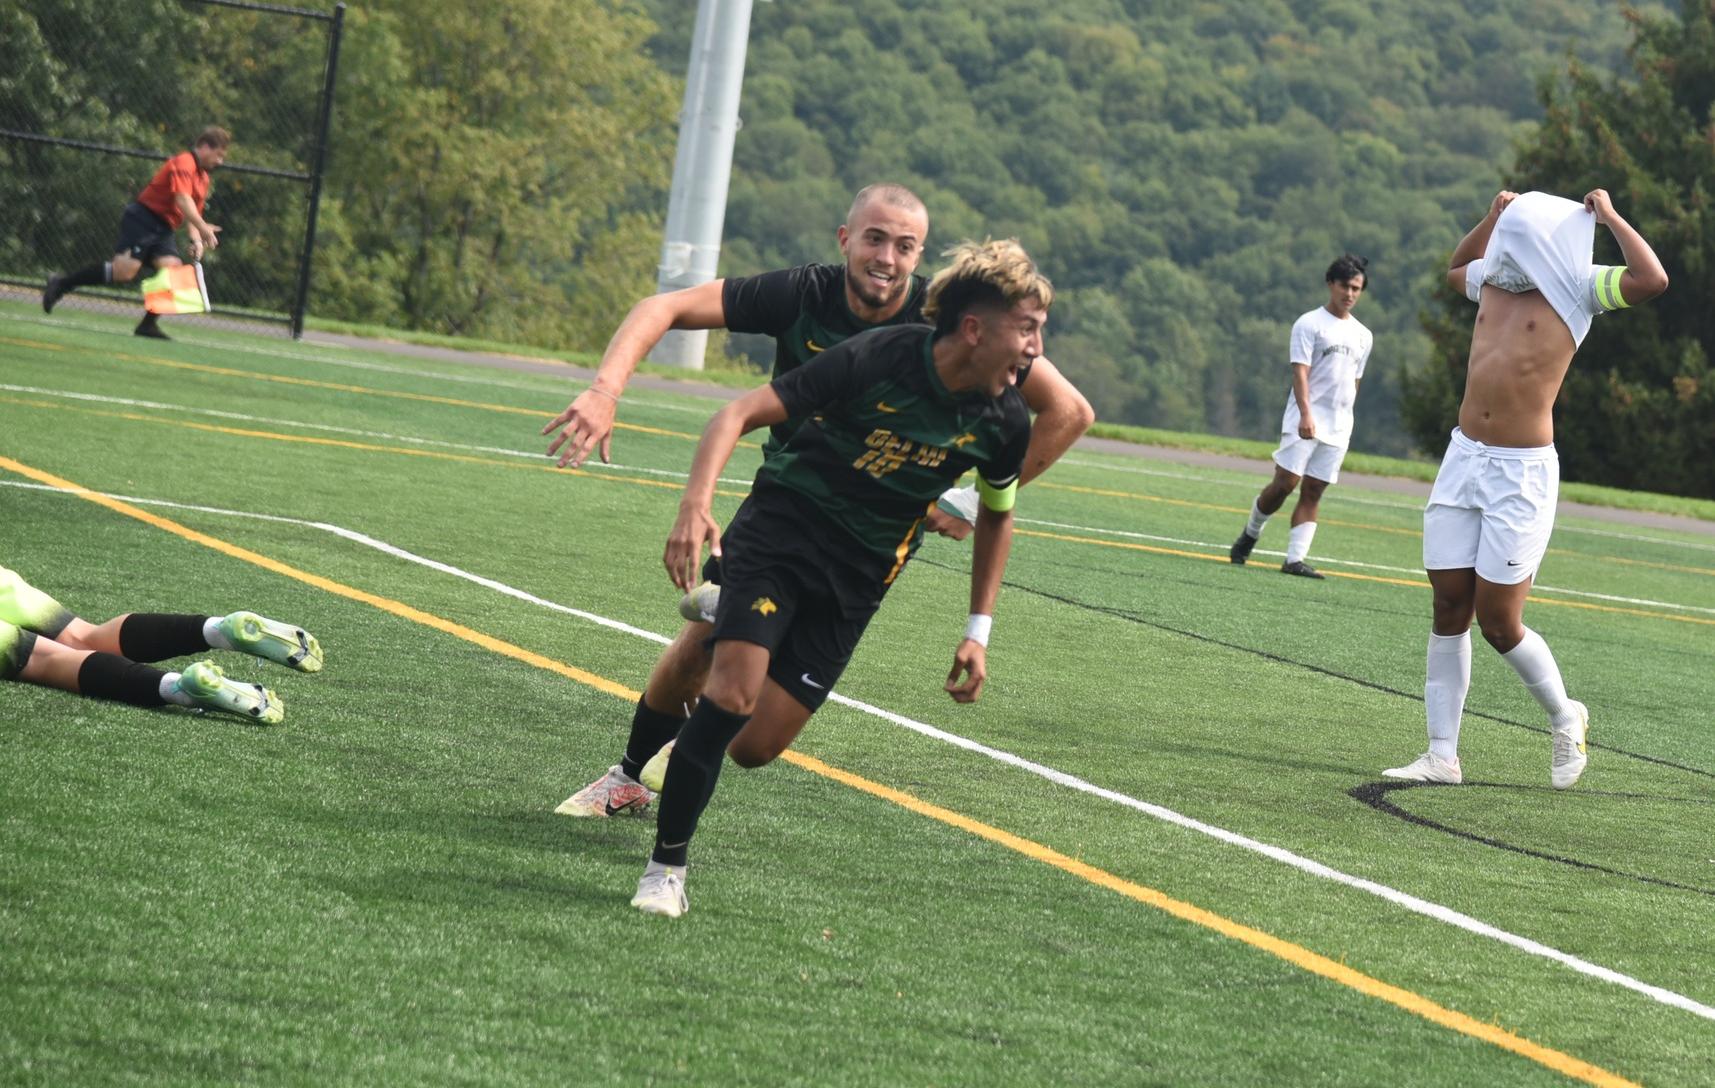 Once Again, SUNY Delhi Comes From Behind and Steals a 2-1 Win from Future NAC Conference Opponents Morrisville State